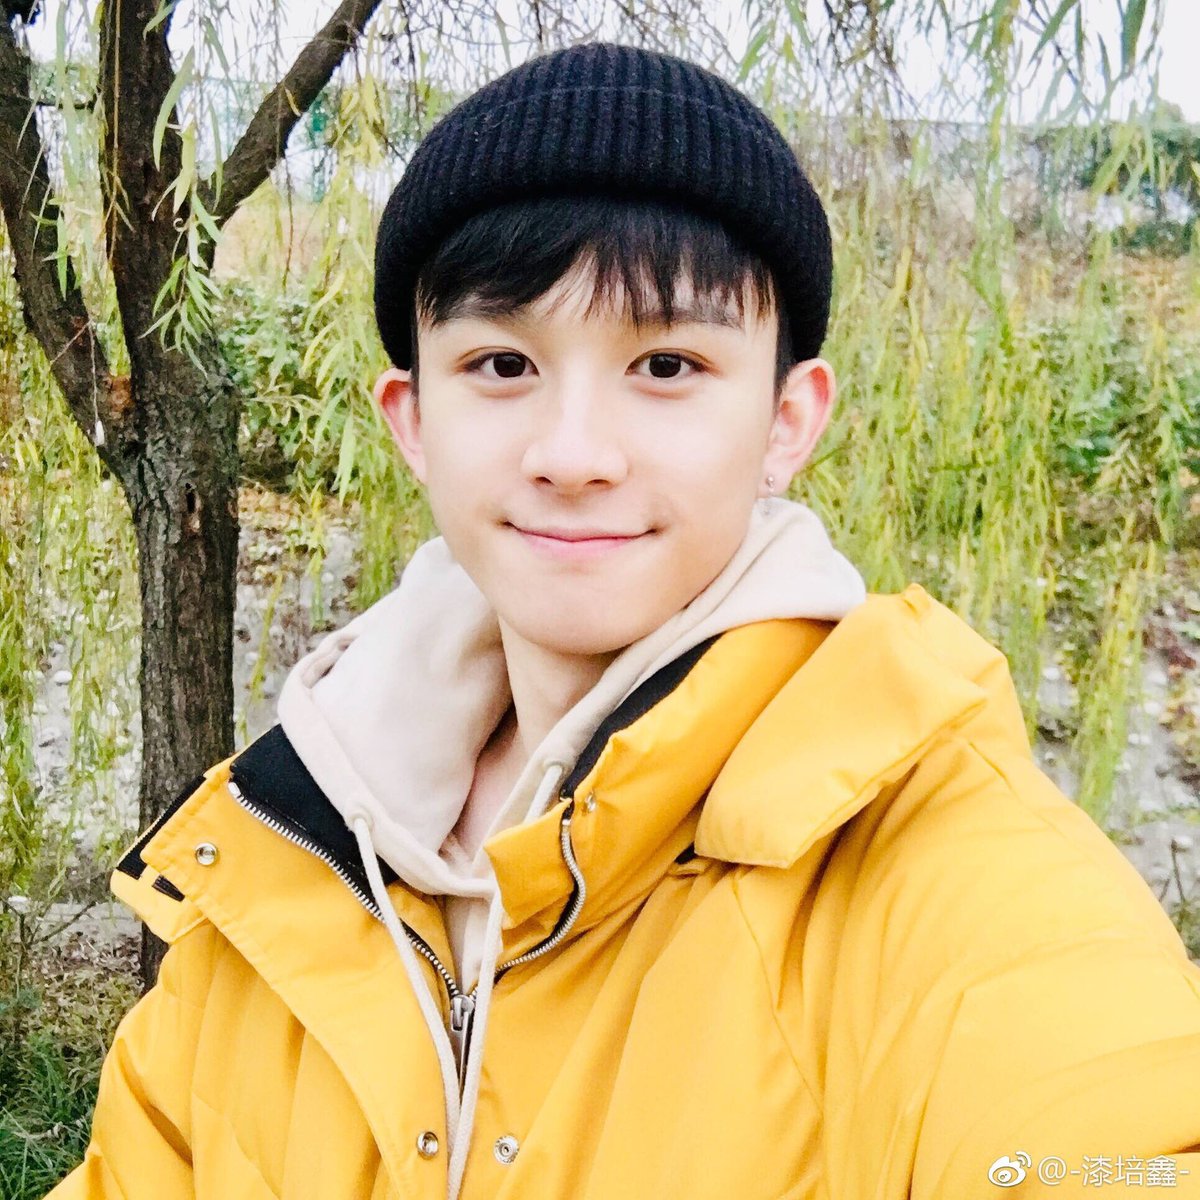 Qi Peixin (漆 培 鑫) - Jin Ling- Looks like he could be a member of TFBOYS- A ...